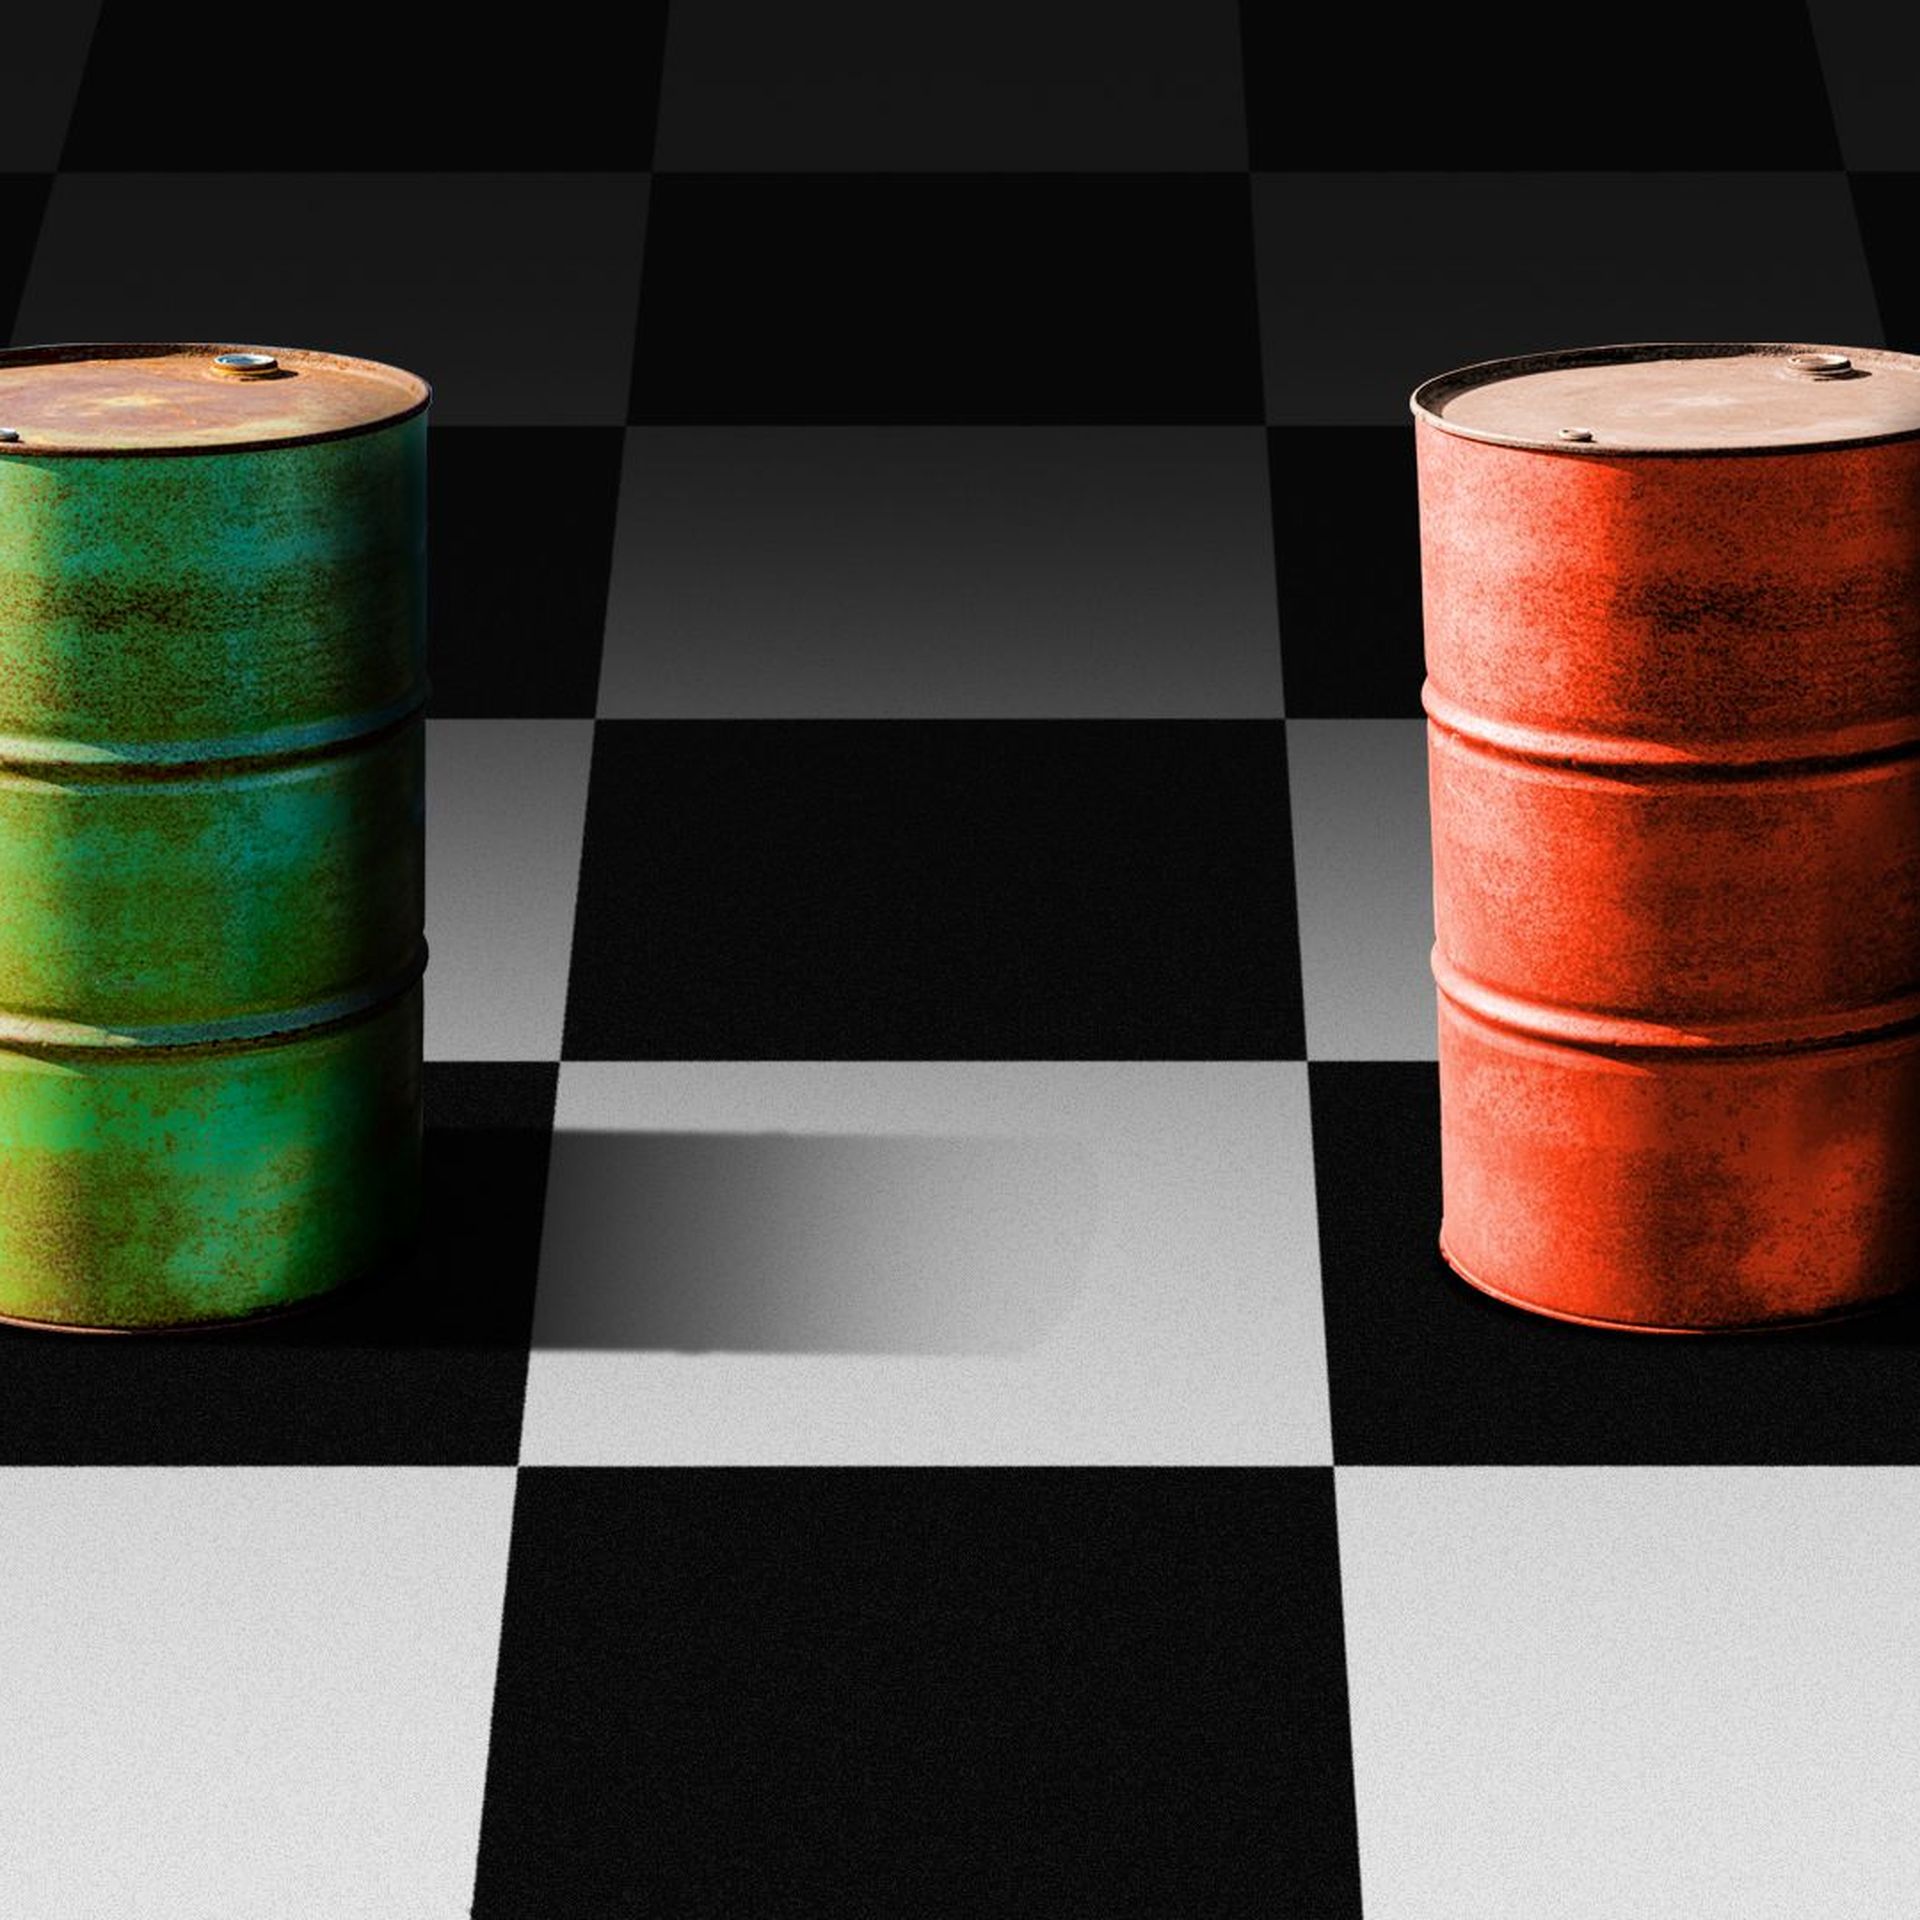 Illustrations of two oil barrels facing off on a chessboard 